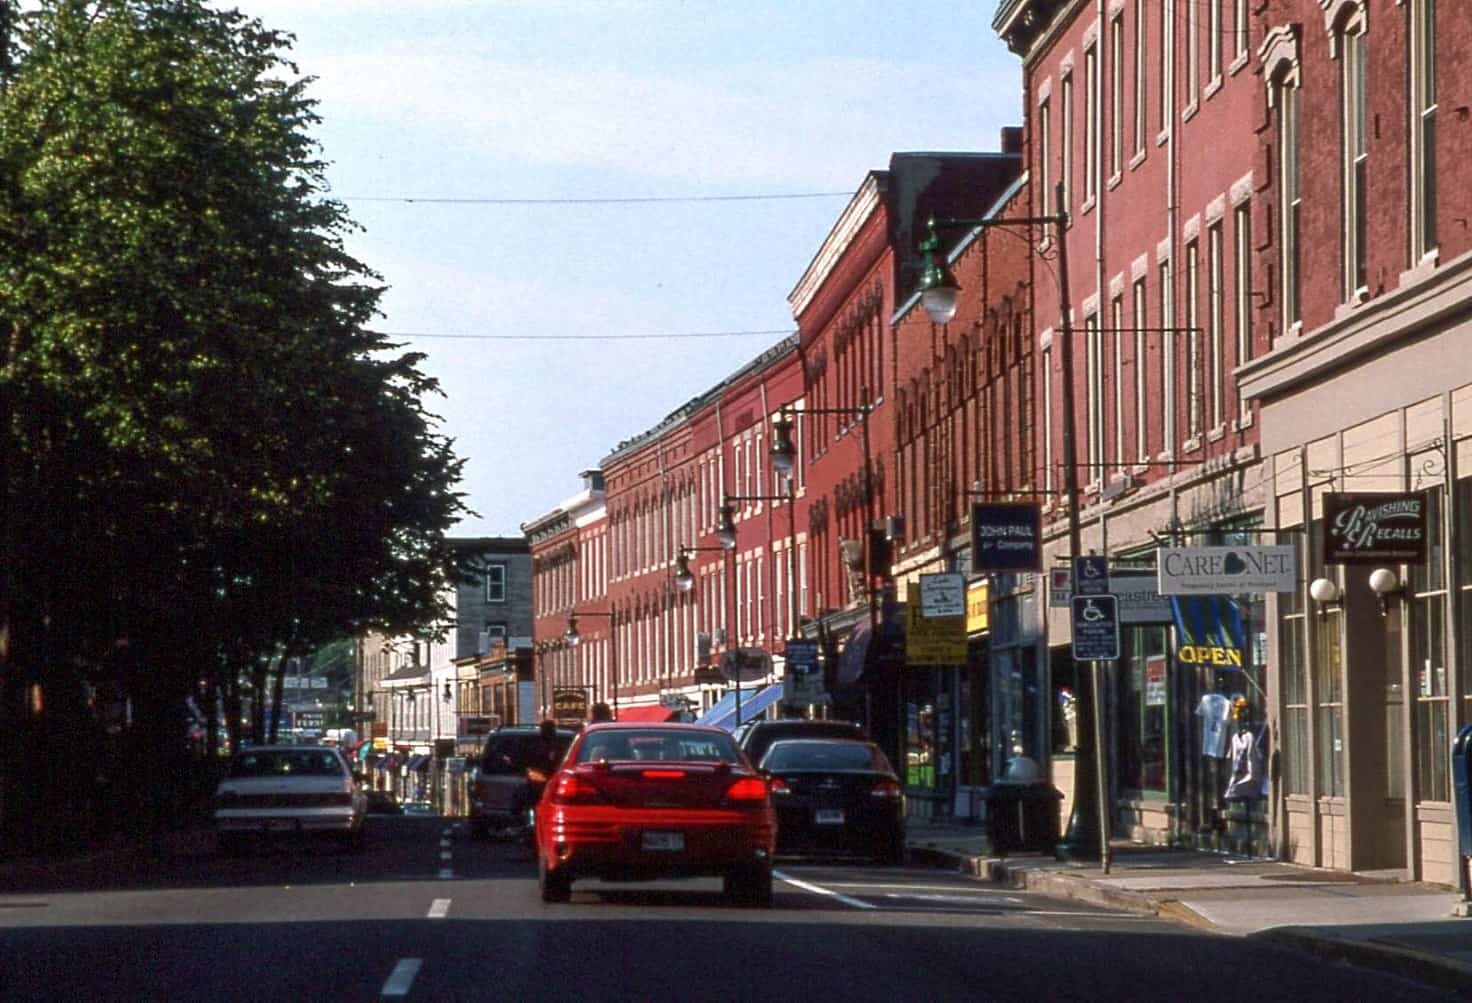 Downtowon Rockland with a row of three-story brick buildings.